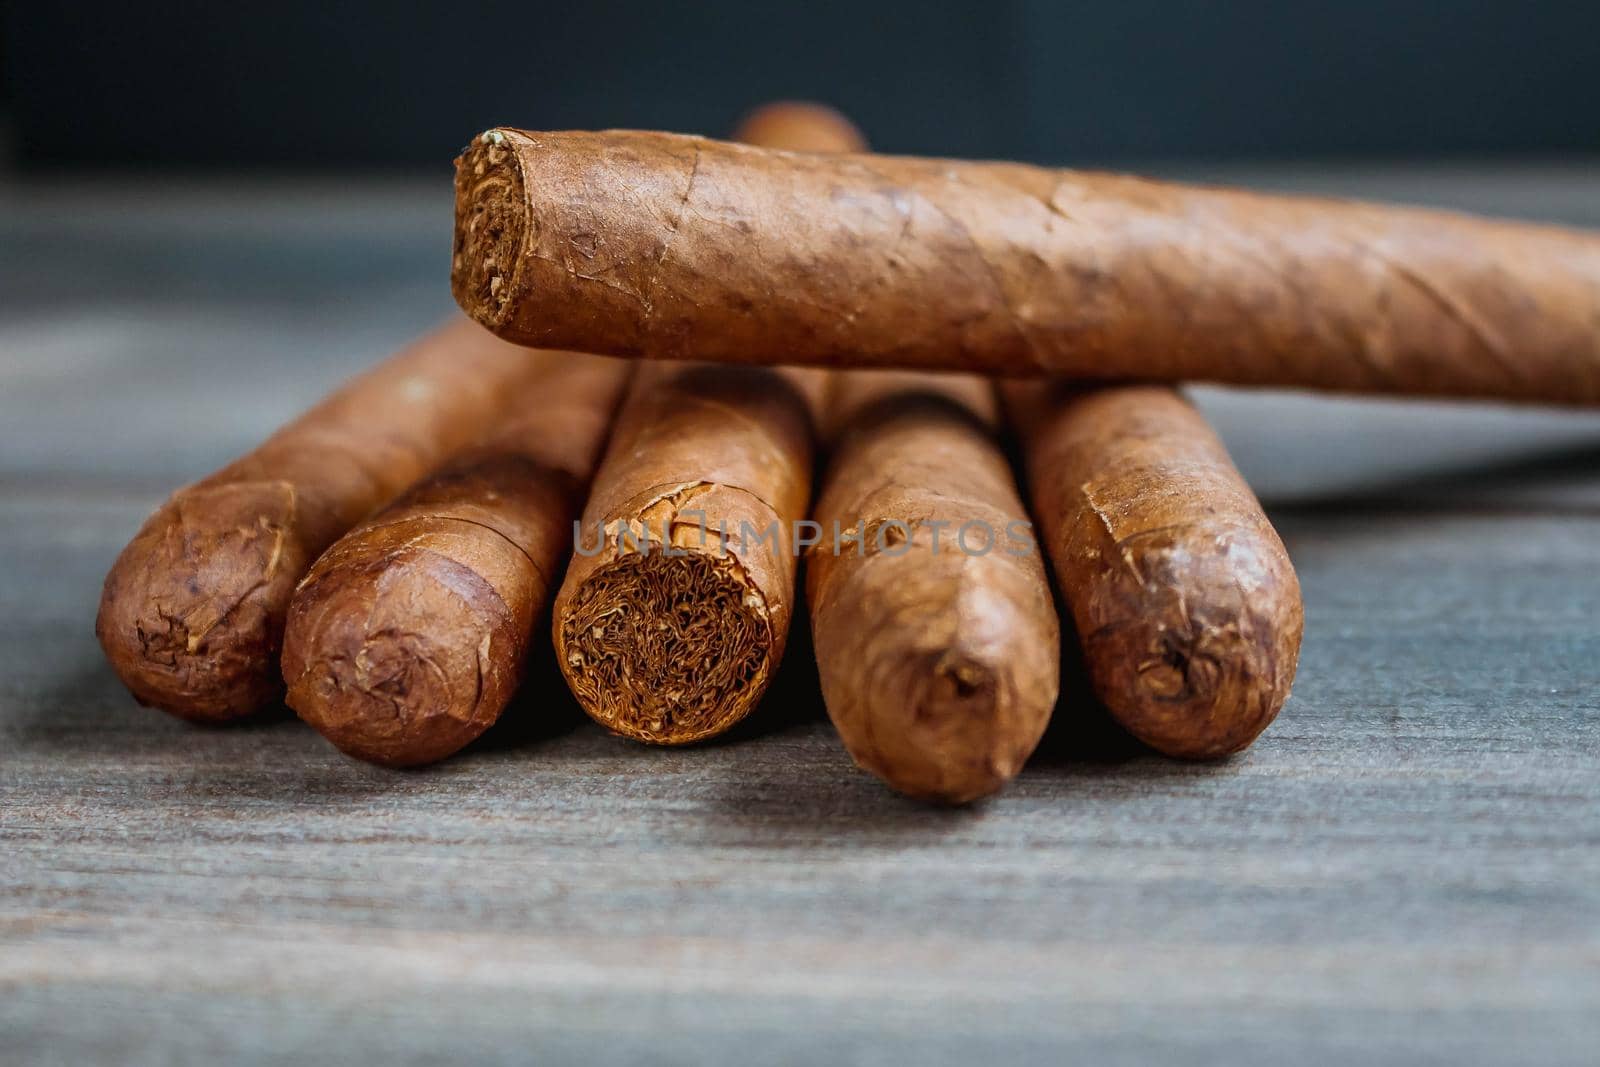 Close view of cigars on the wooden background by JuliaDorian